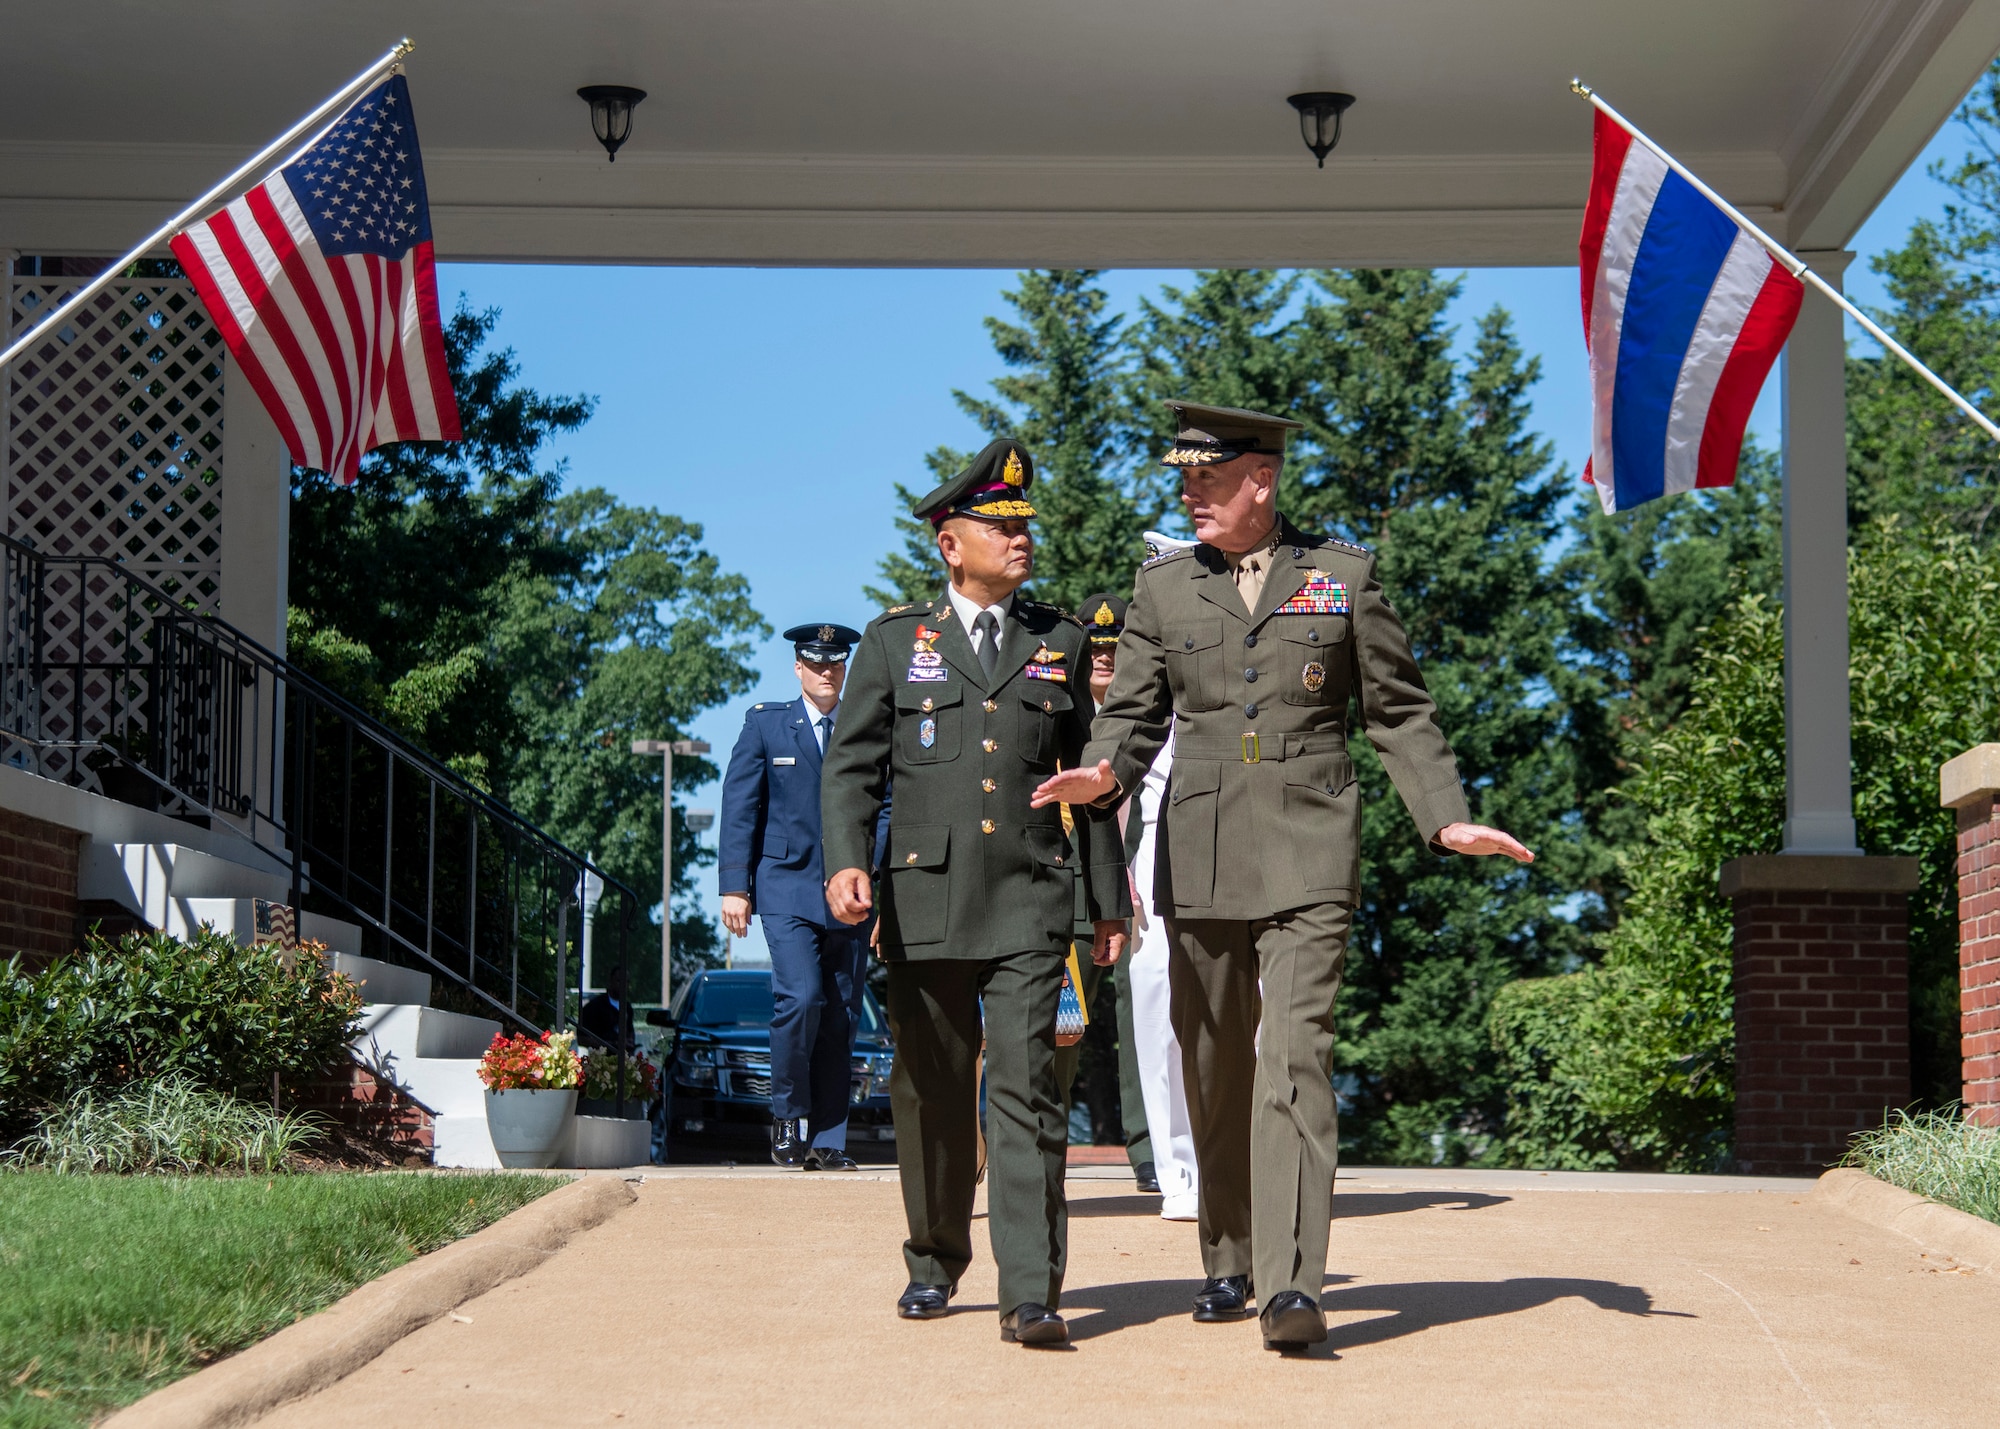 Marine Corps Gen. Joe Dunford, chairman of the Joint Chiefs of Staff, and Thai Army Gen. Tarnchaiyan Srisuwan, chief of the Defense Force, walk out to Whipple Field for an honors ceremony on Fort Myer, July 9, 2018.